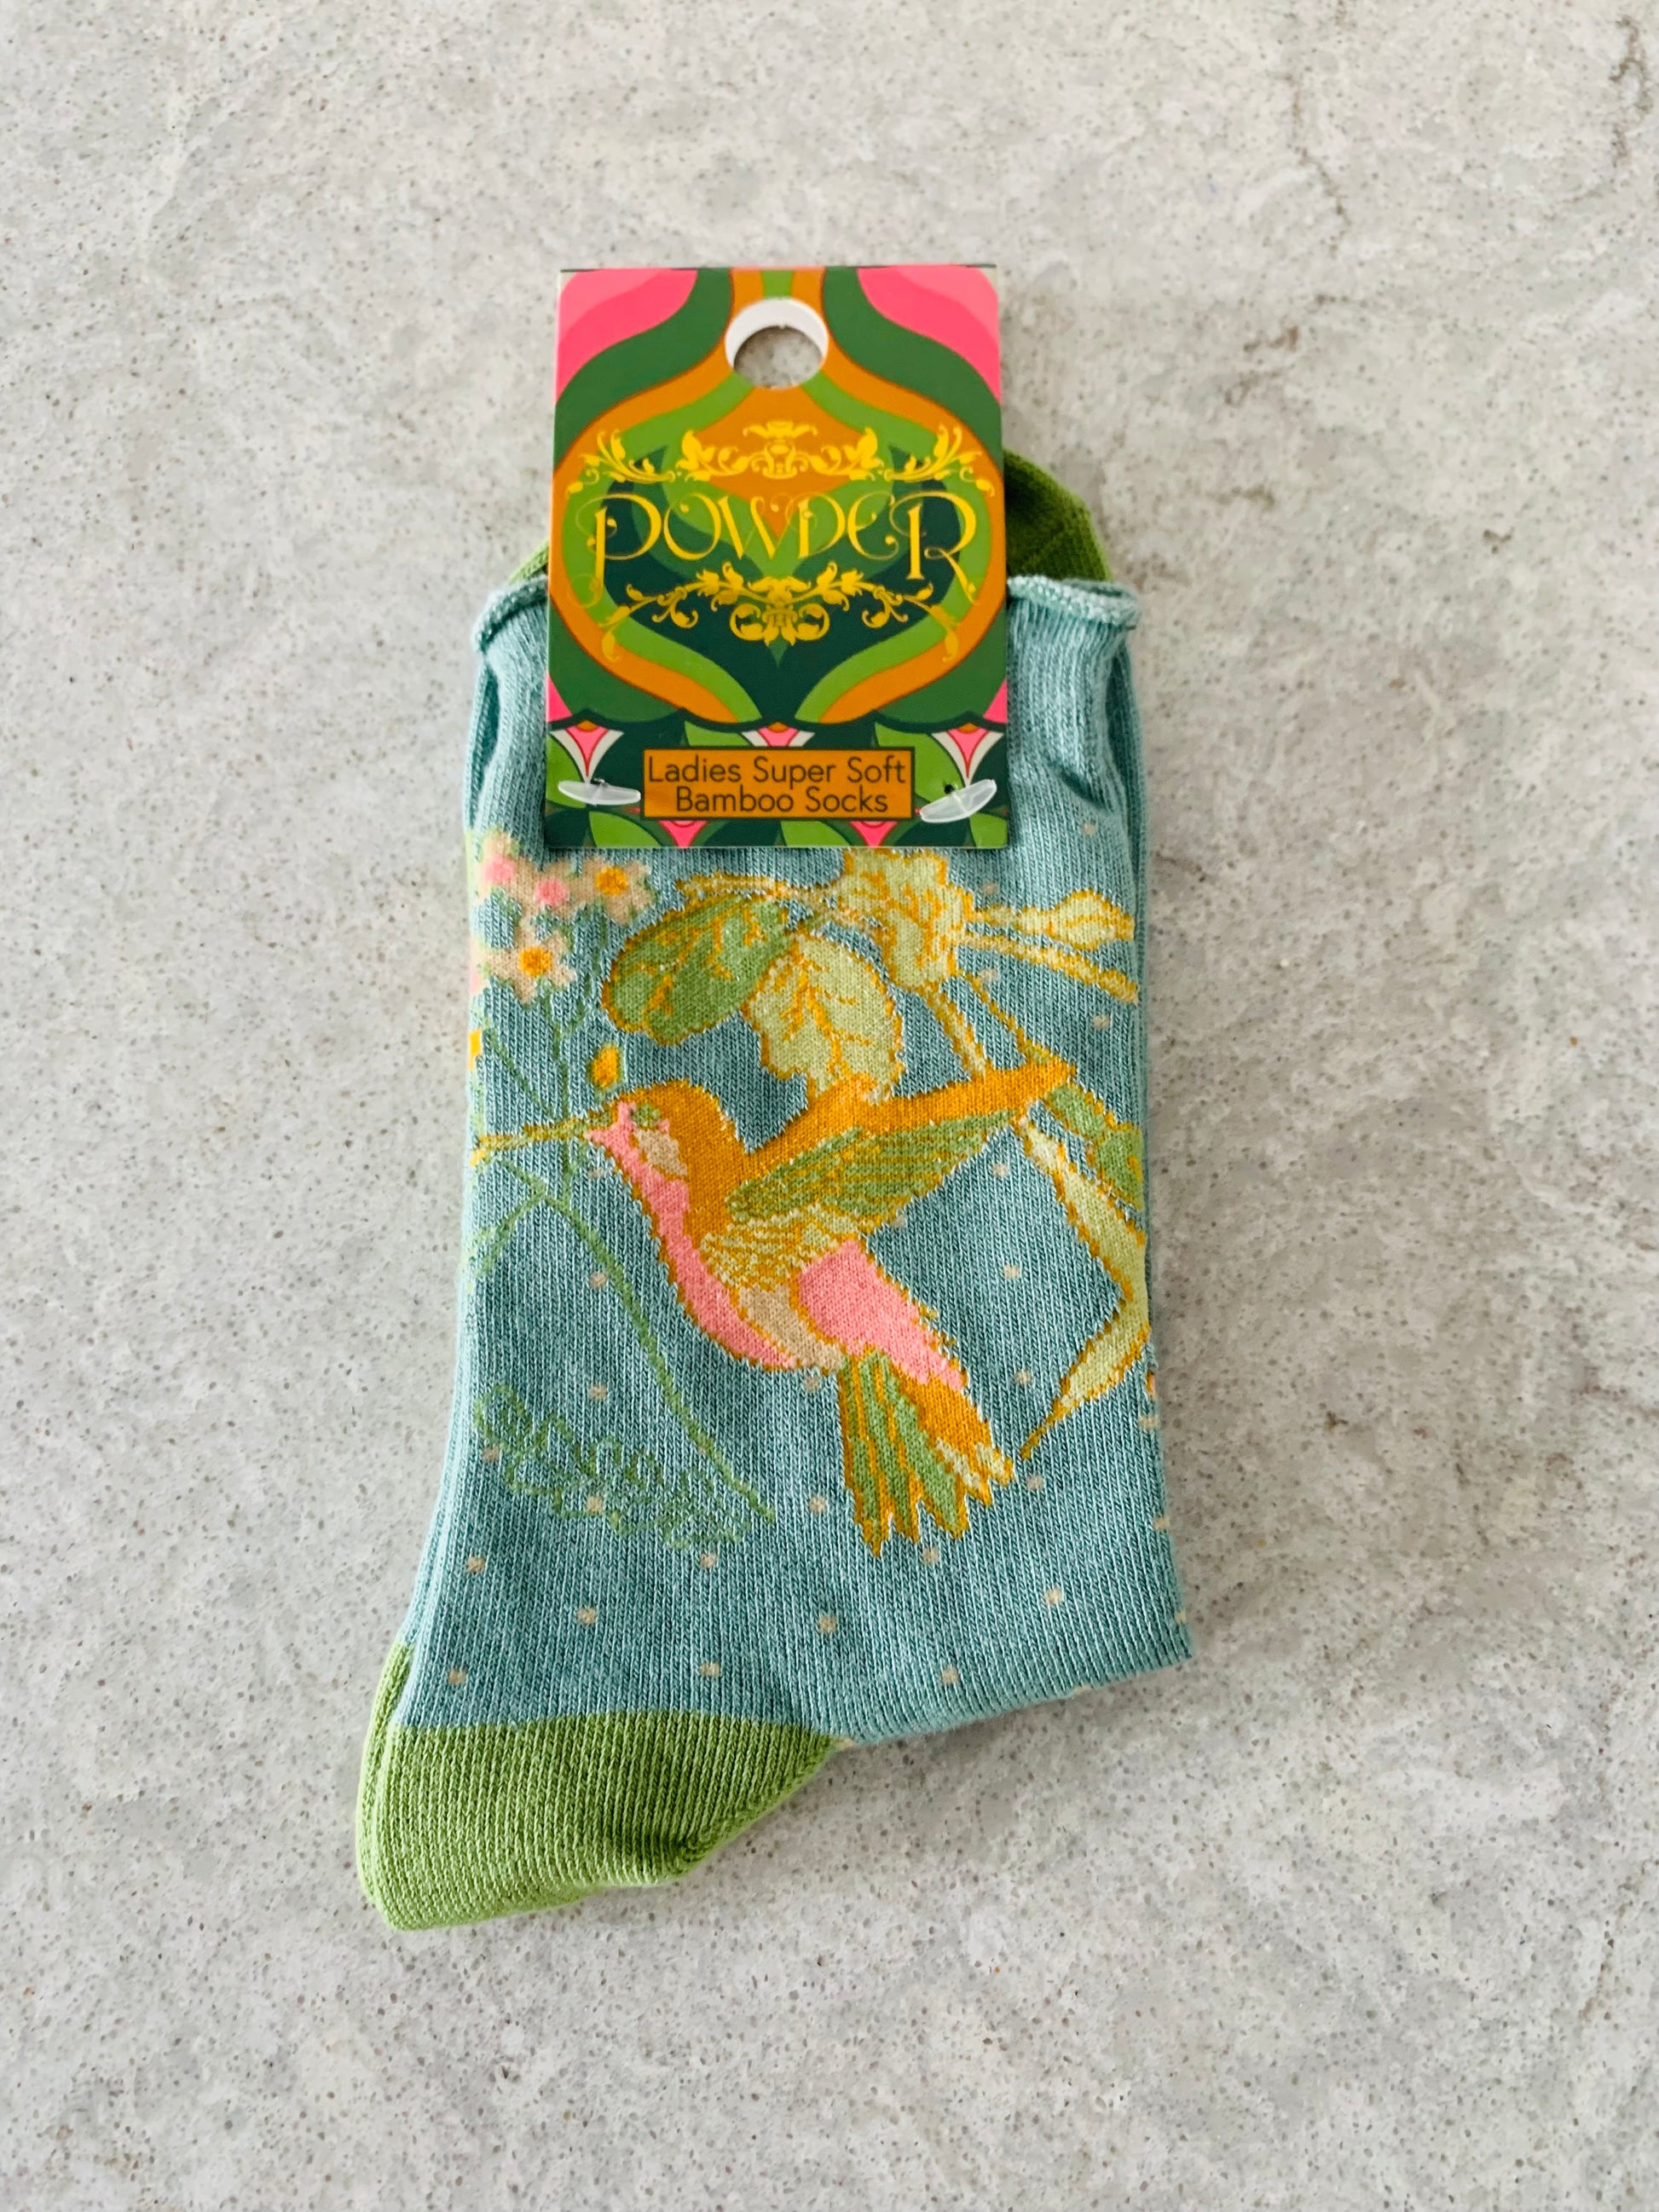 Crafted with bamboo, the Powder Uk ankle socks are ideal for topping off any footwear. The hummingbird pattern will whisk you away to a tropical paradise without ever leaving your feet!